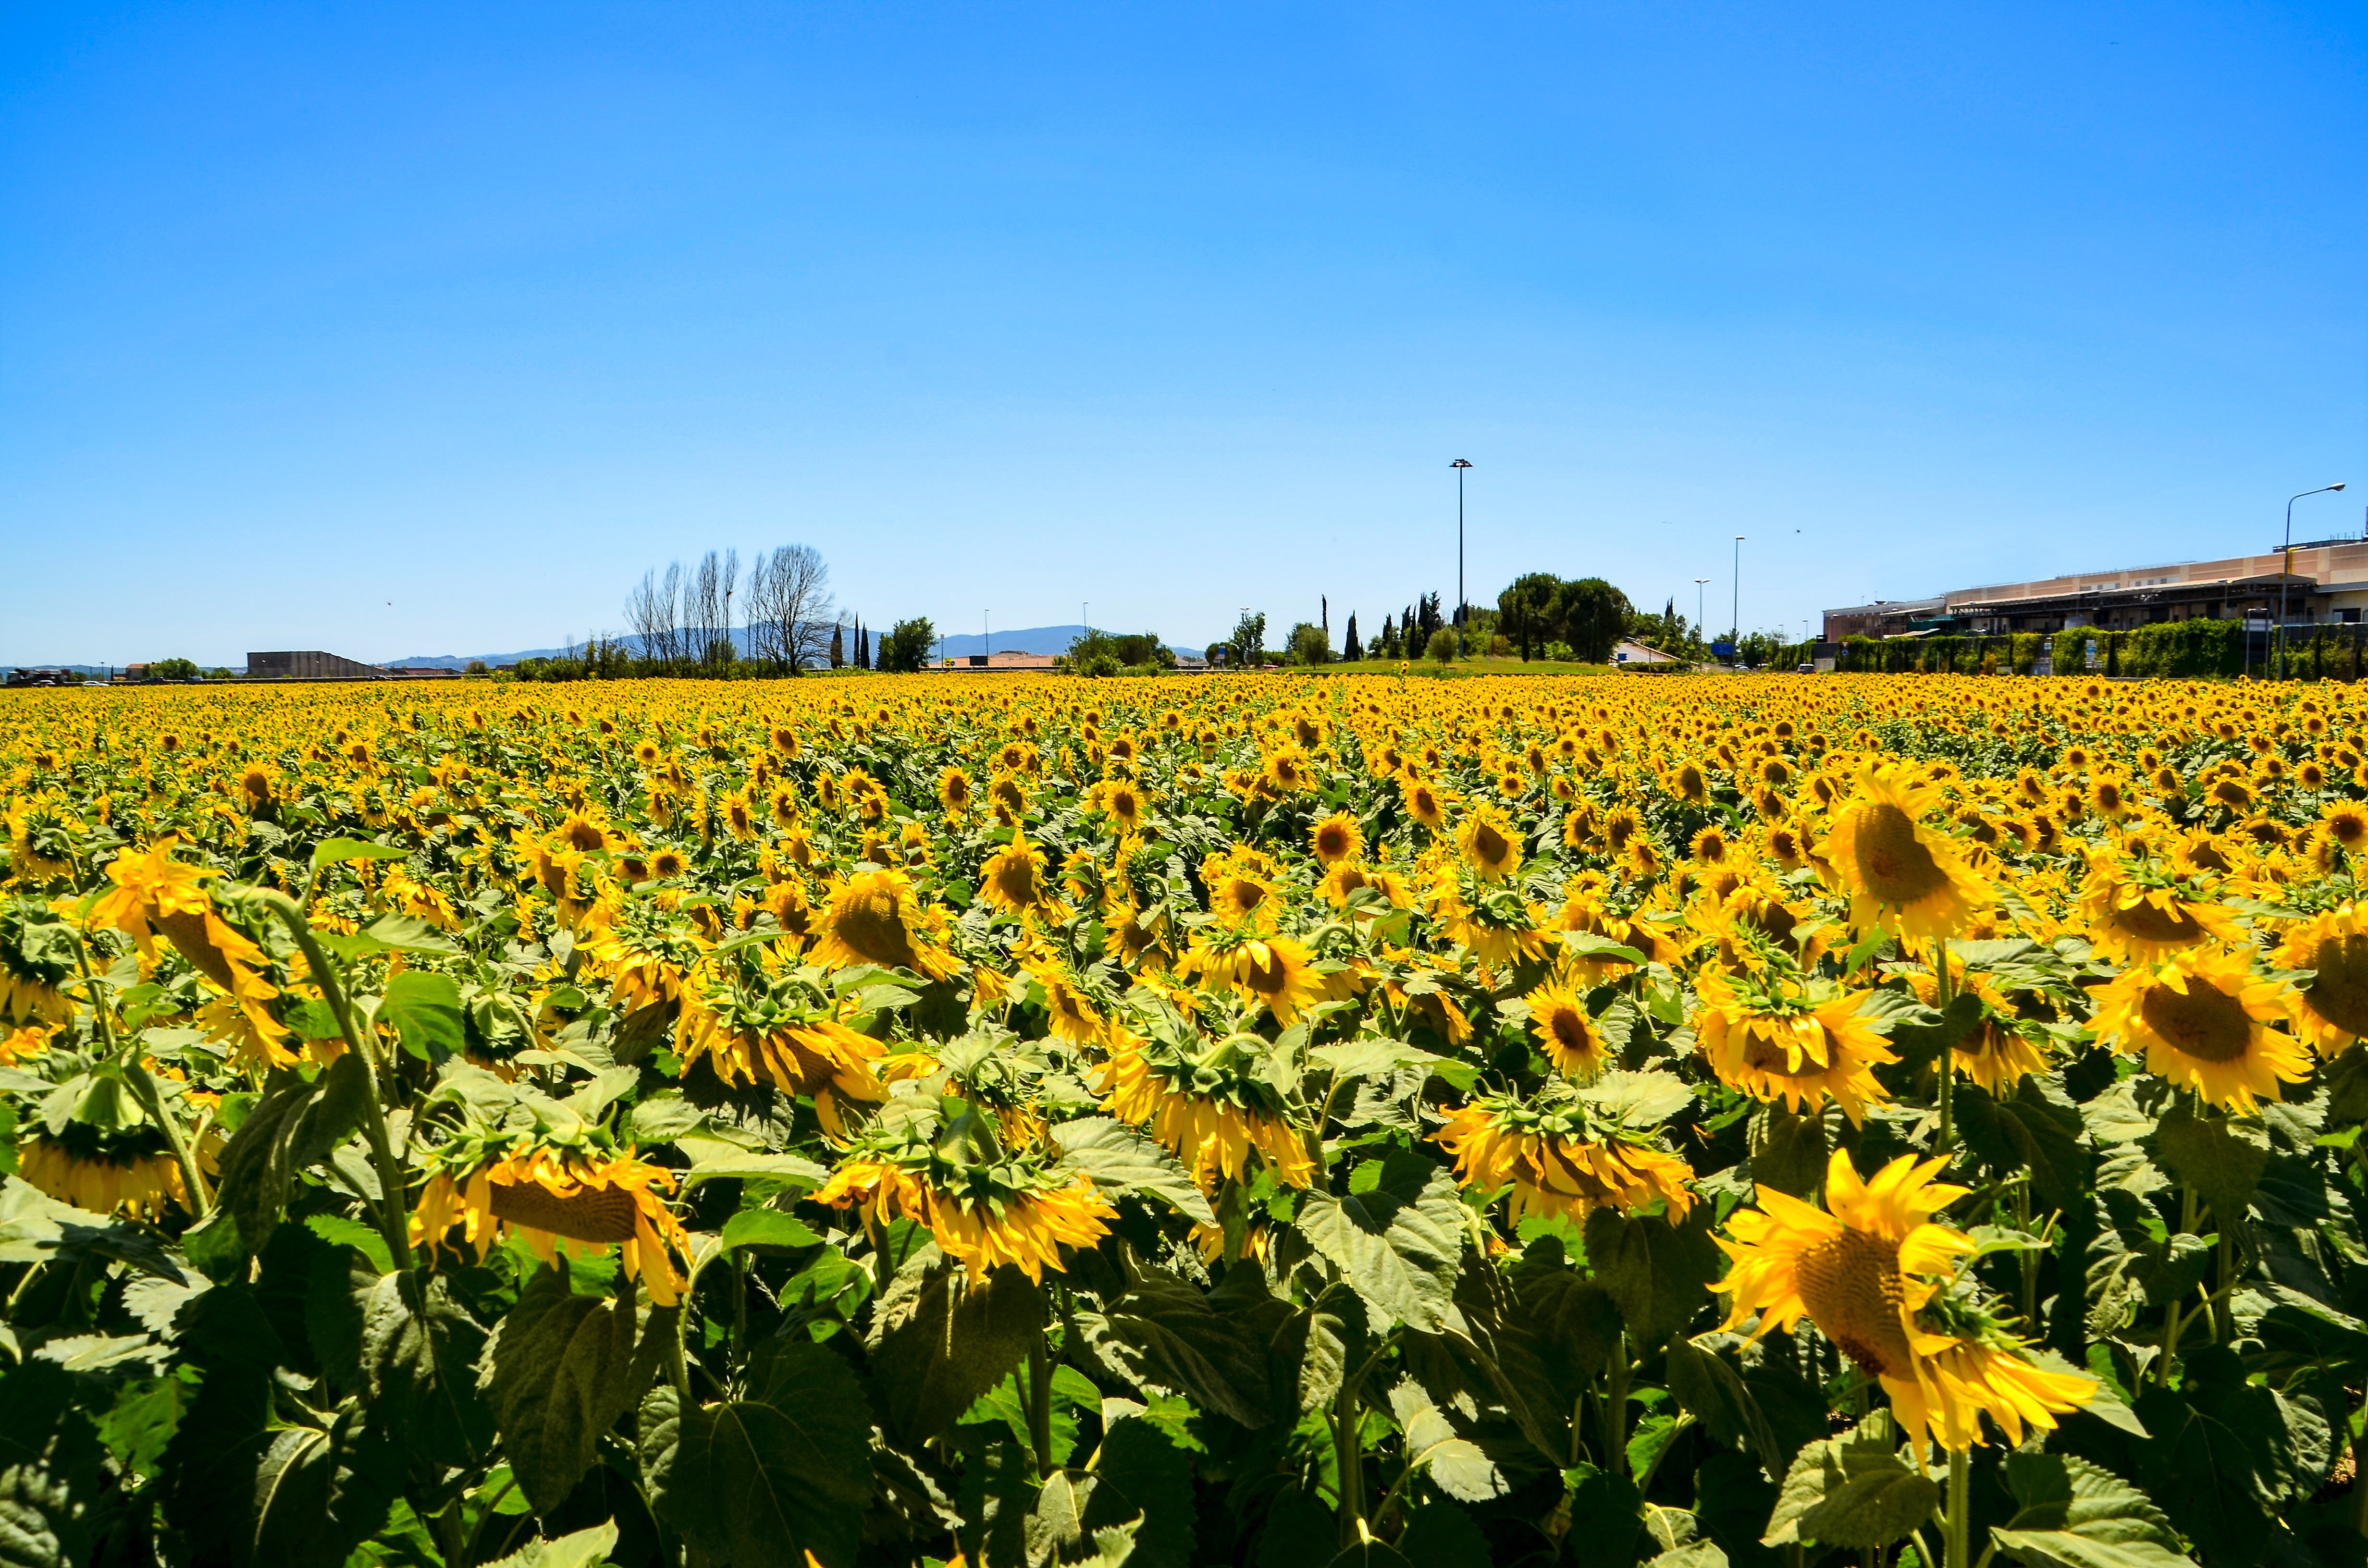 Bed of sunflowers photo